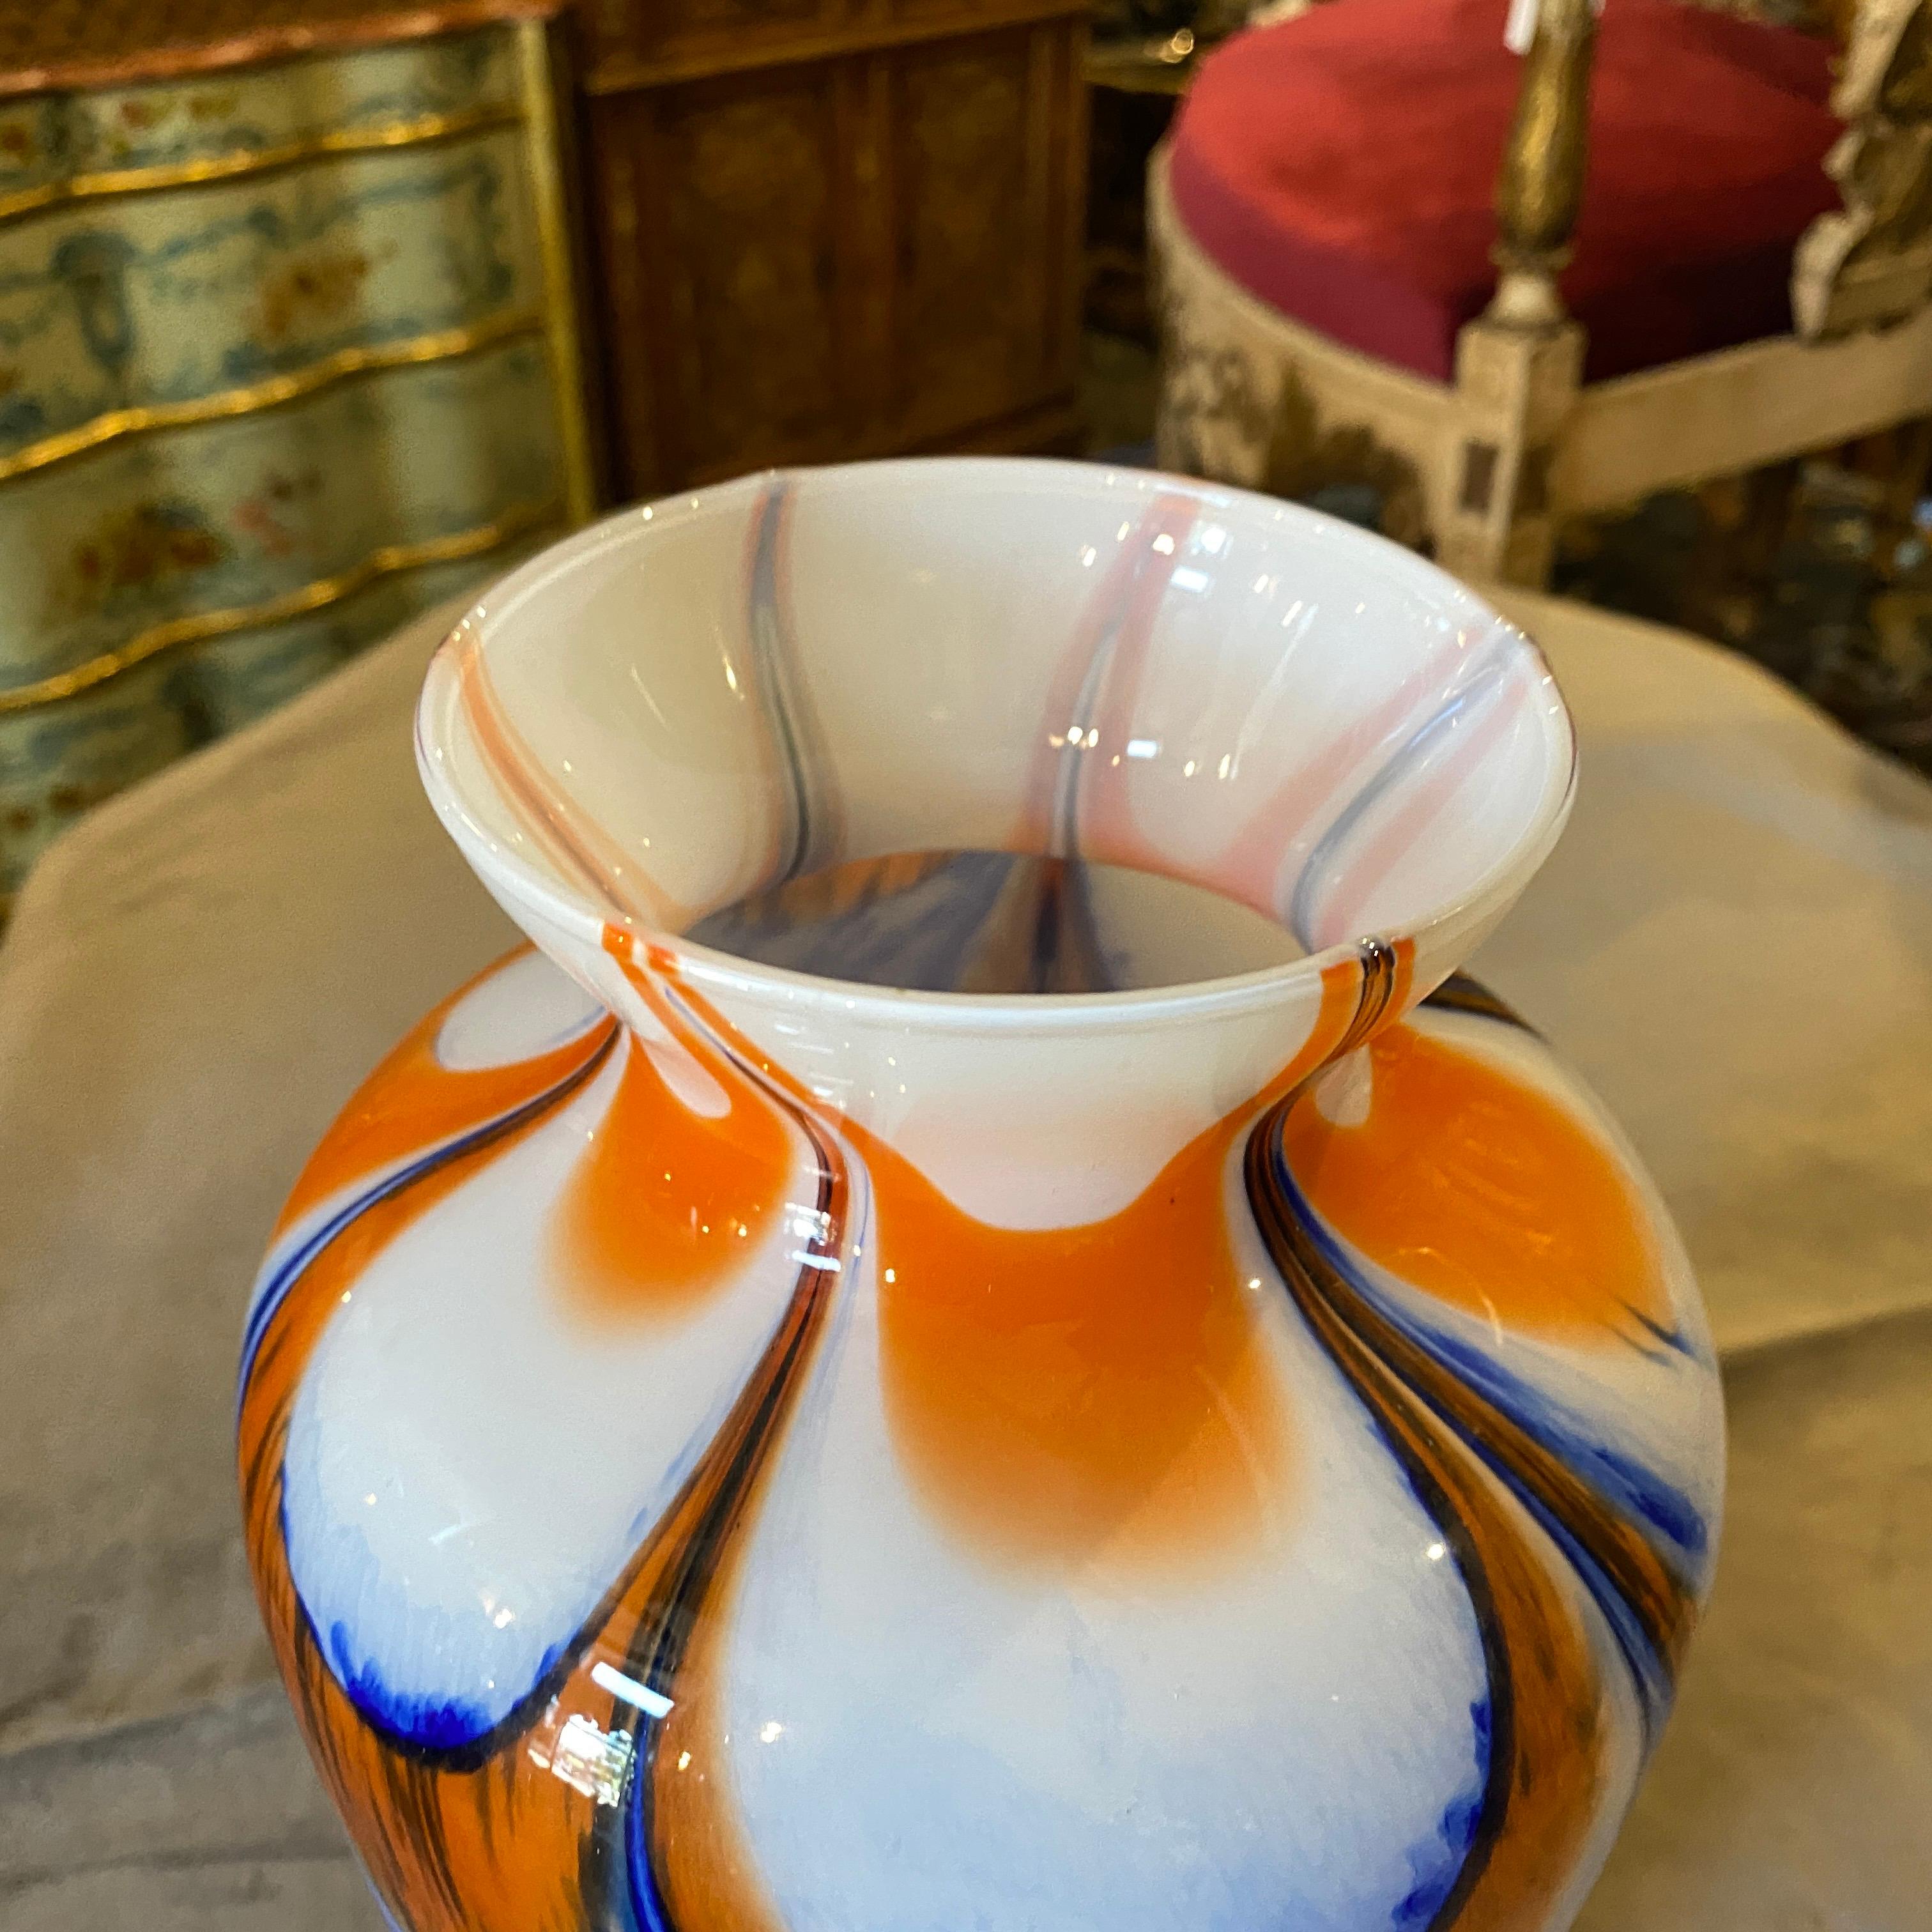 blown glass vases made in italy